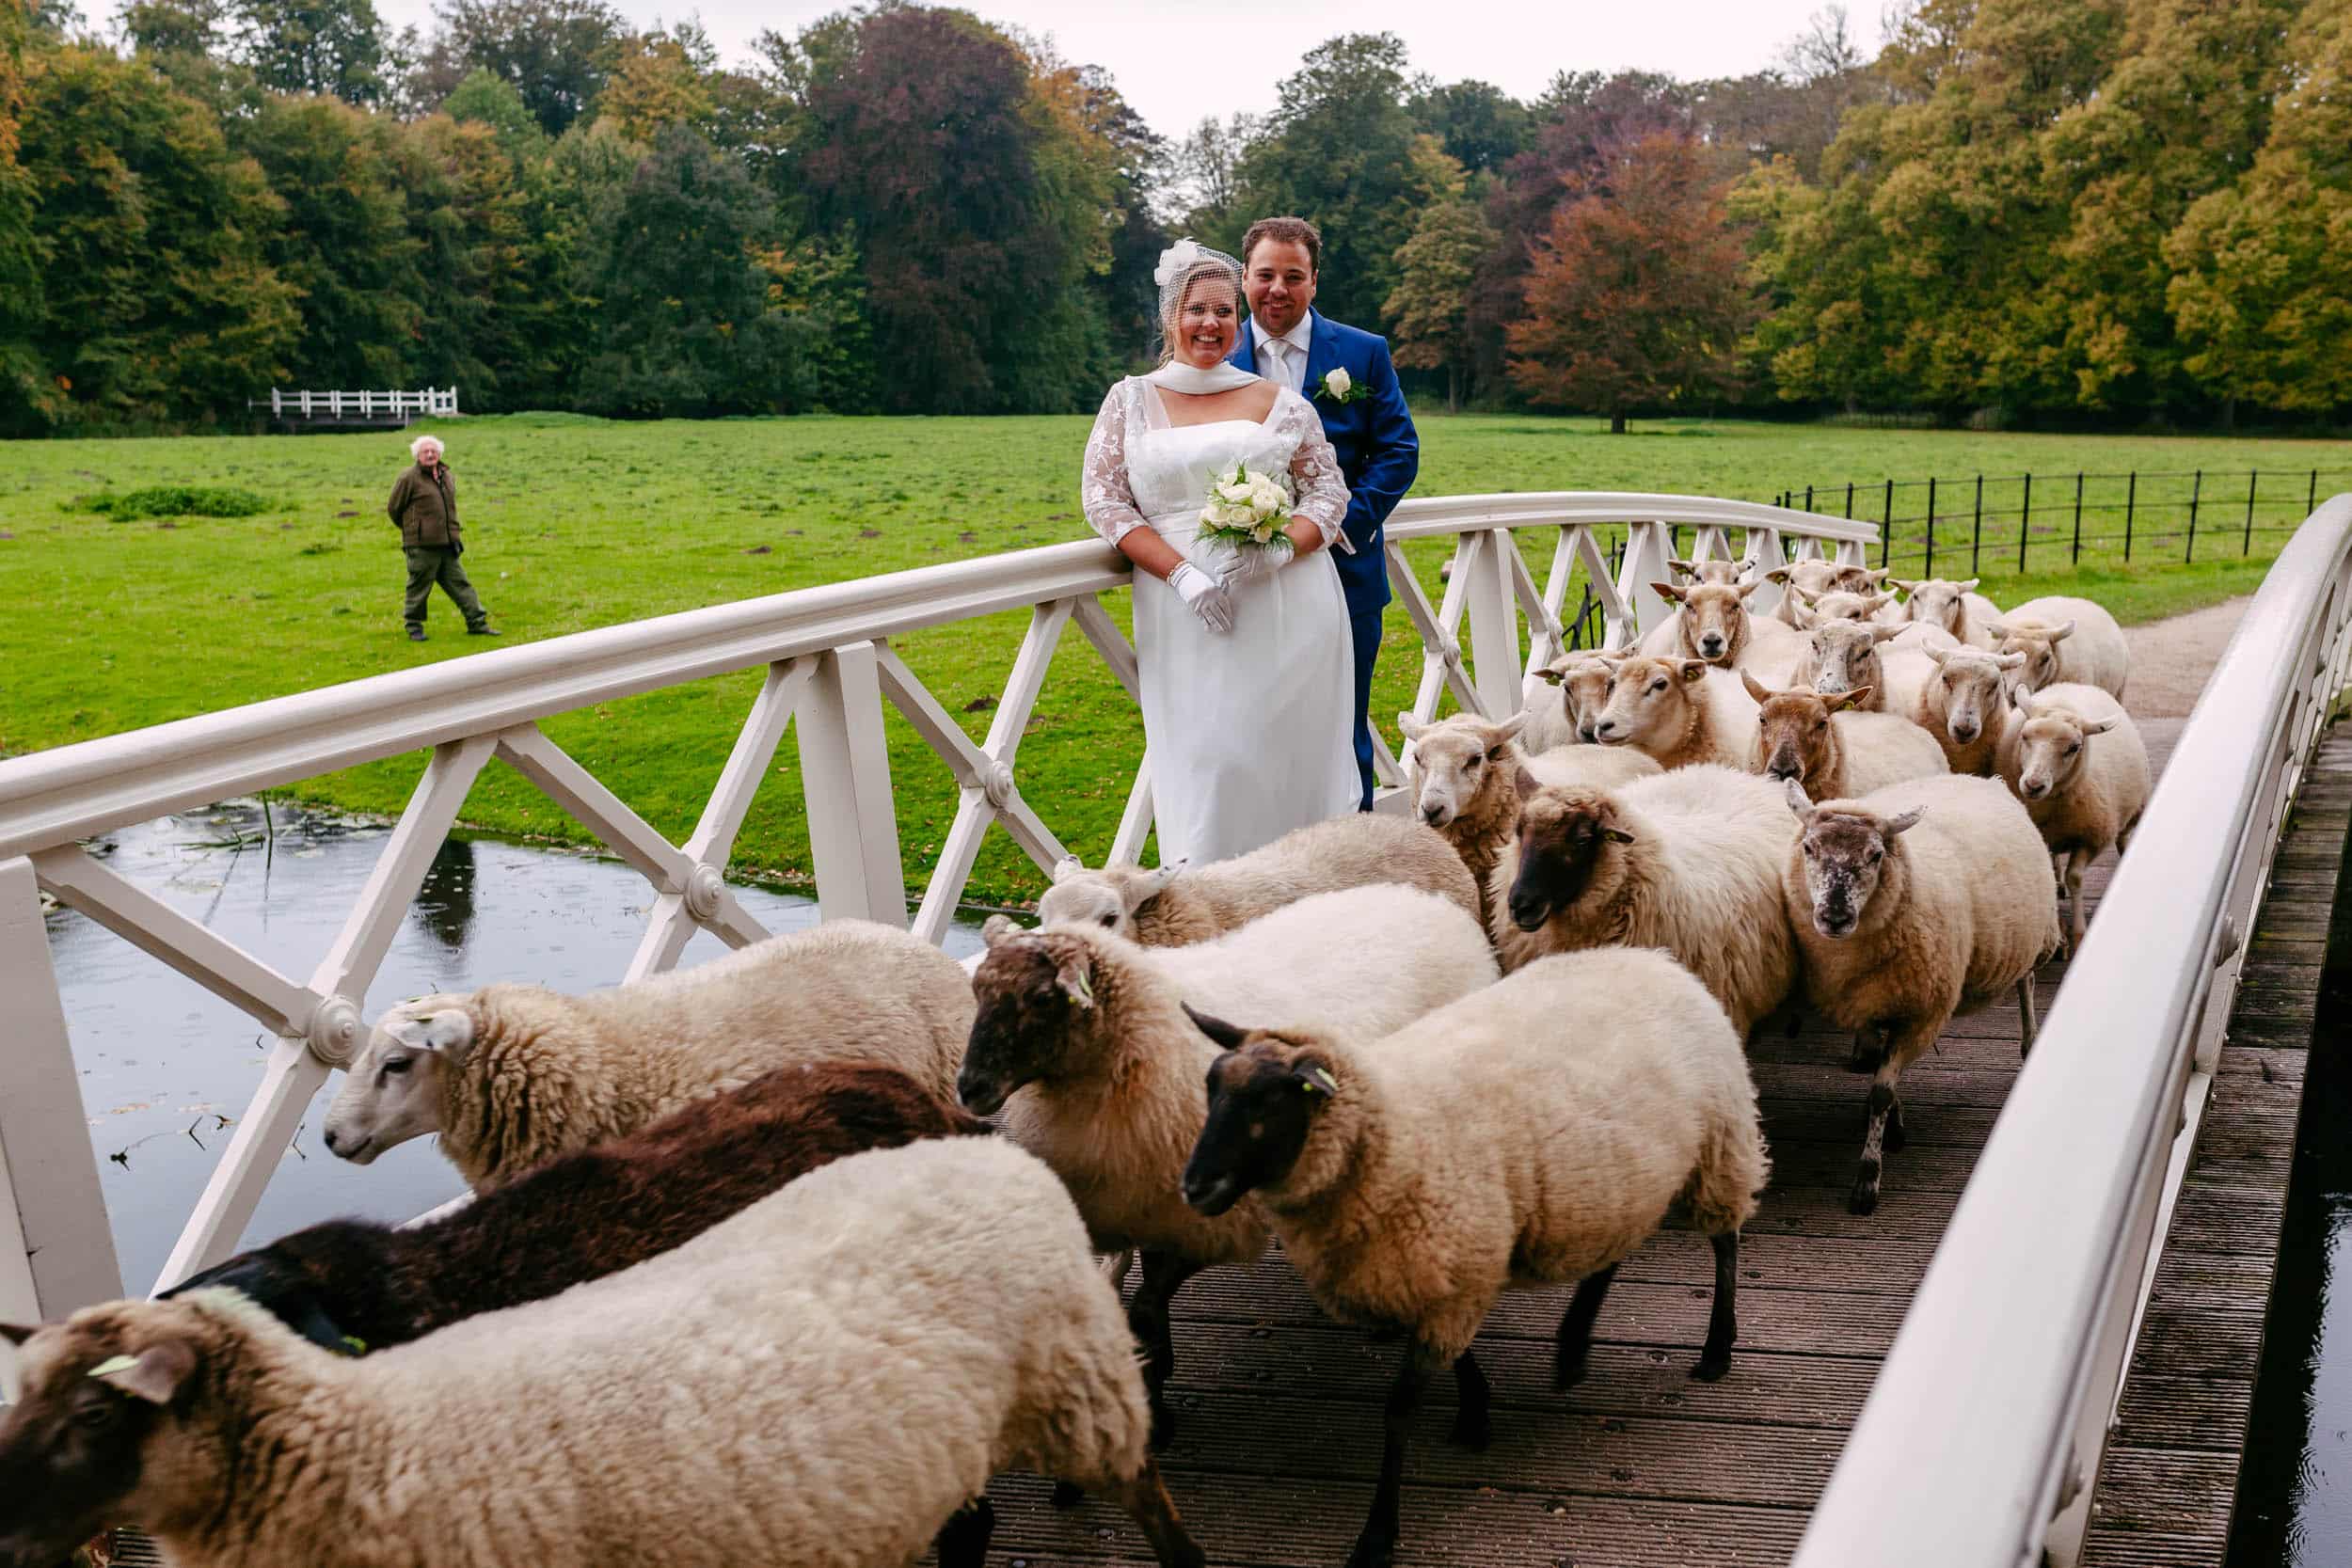 A bride and groom with sheep at the Orangery Elswout Bridge.